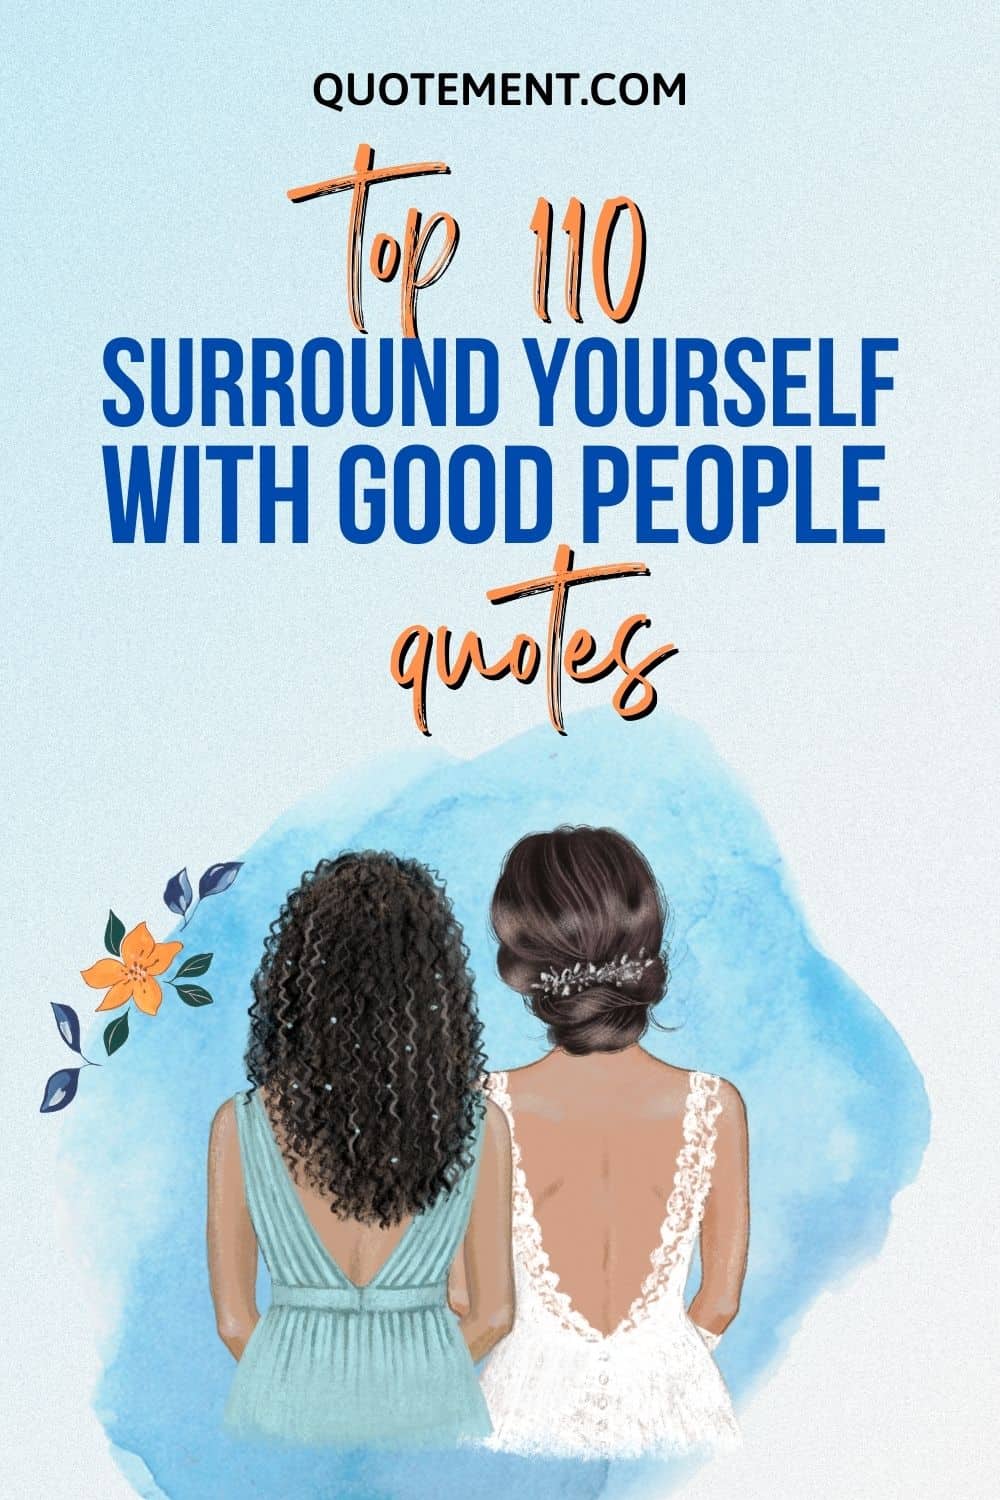 110 Superb Surround Yourself With Good People Quotes
